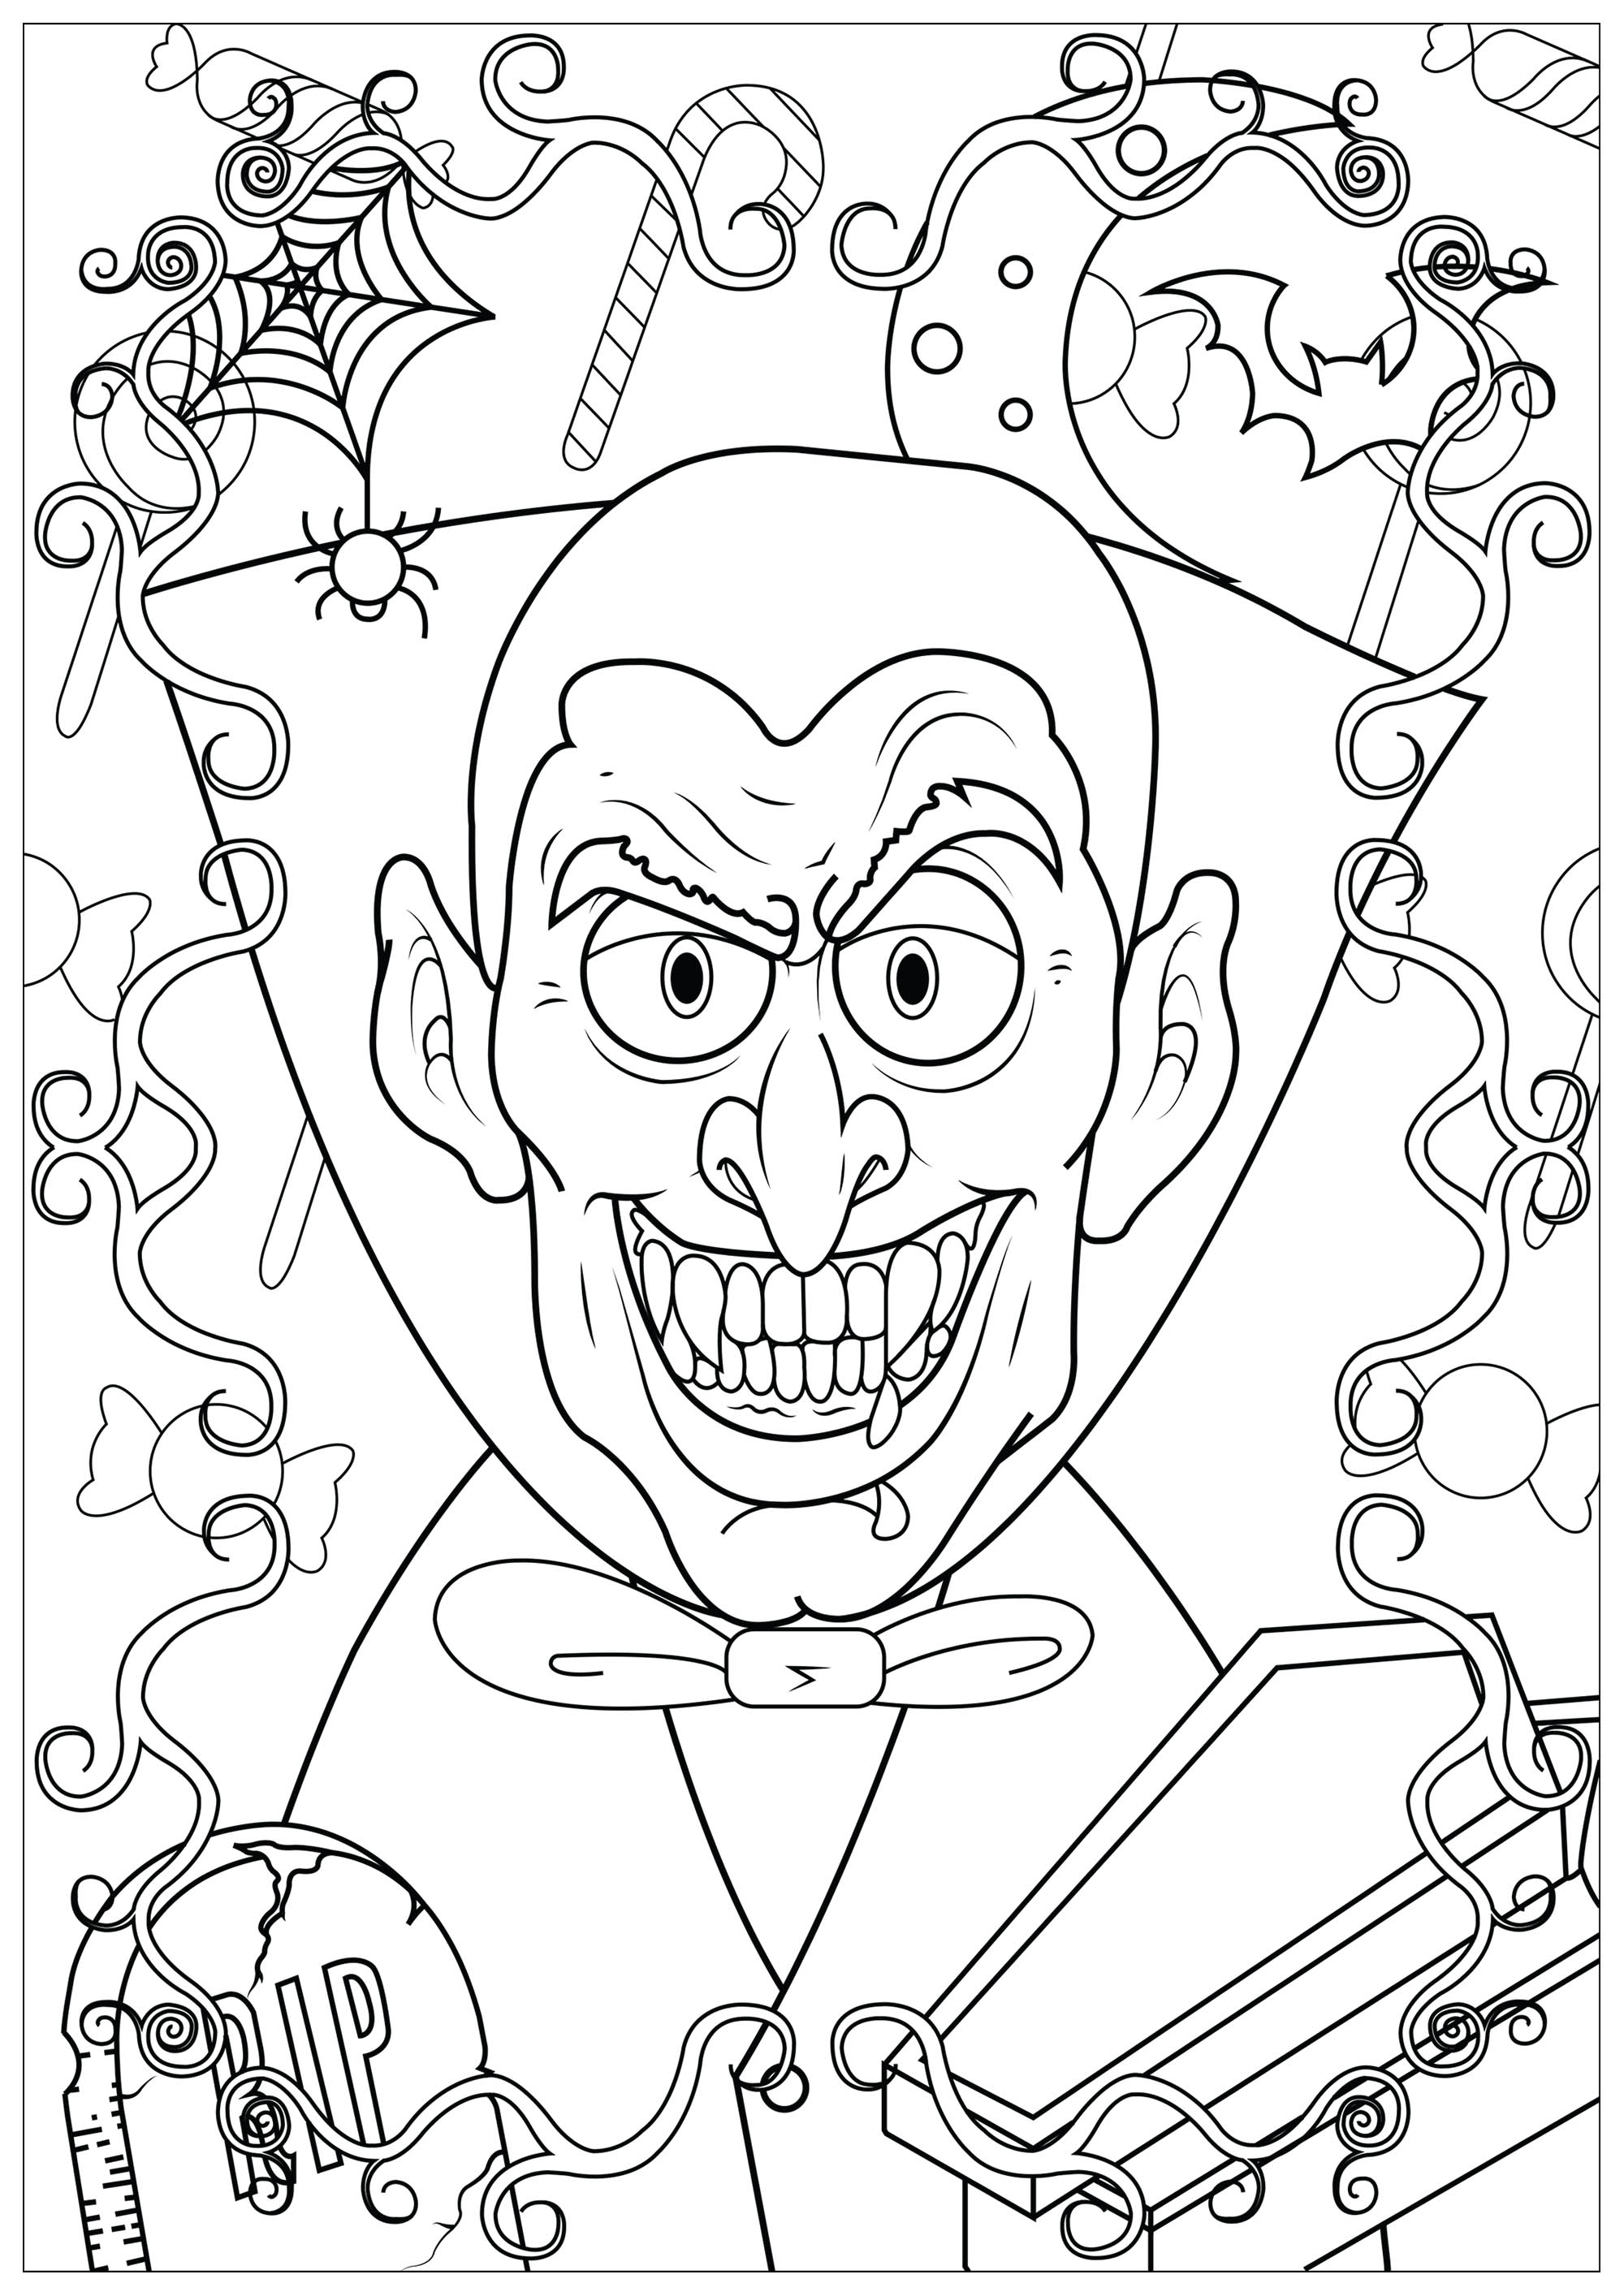 A vampire with sharp teeth. This coloring page is perfect to celebrate Halloween, if you like the world of vampires and especially Dracula, Artist : Lucie